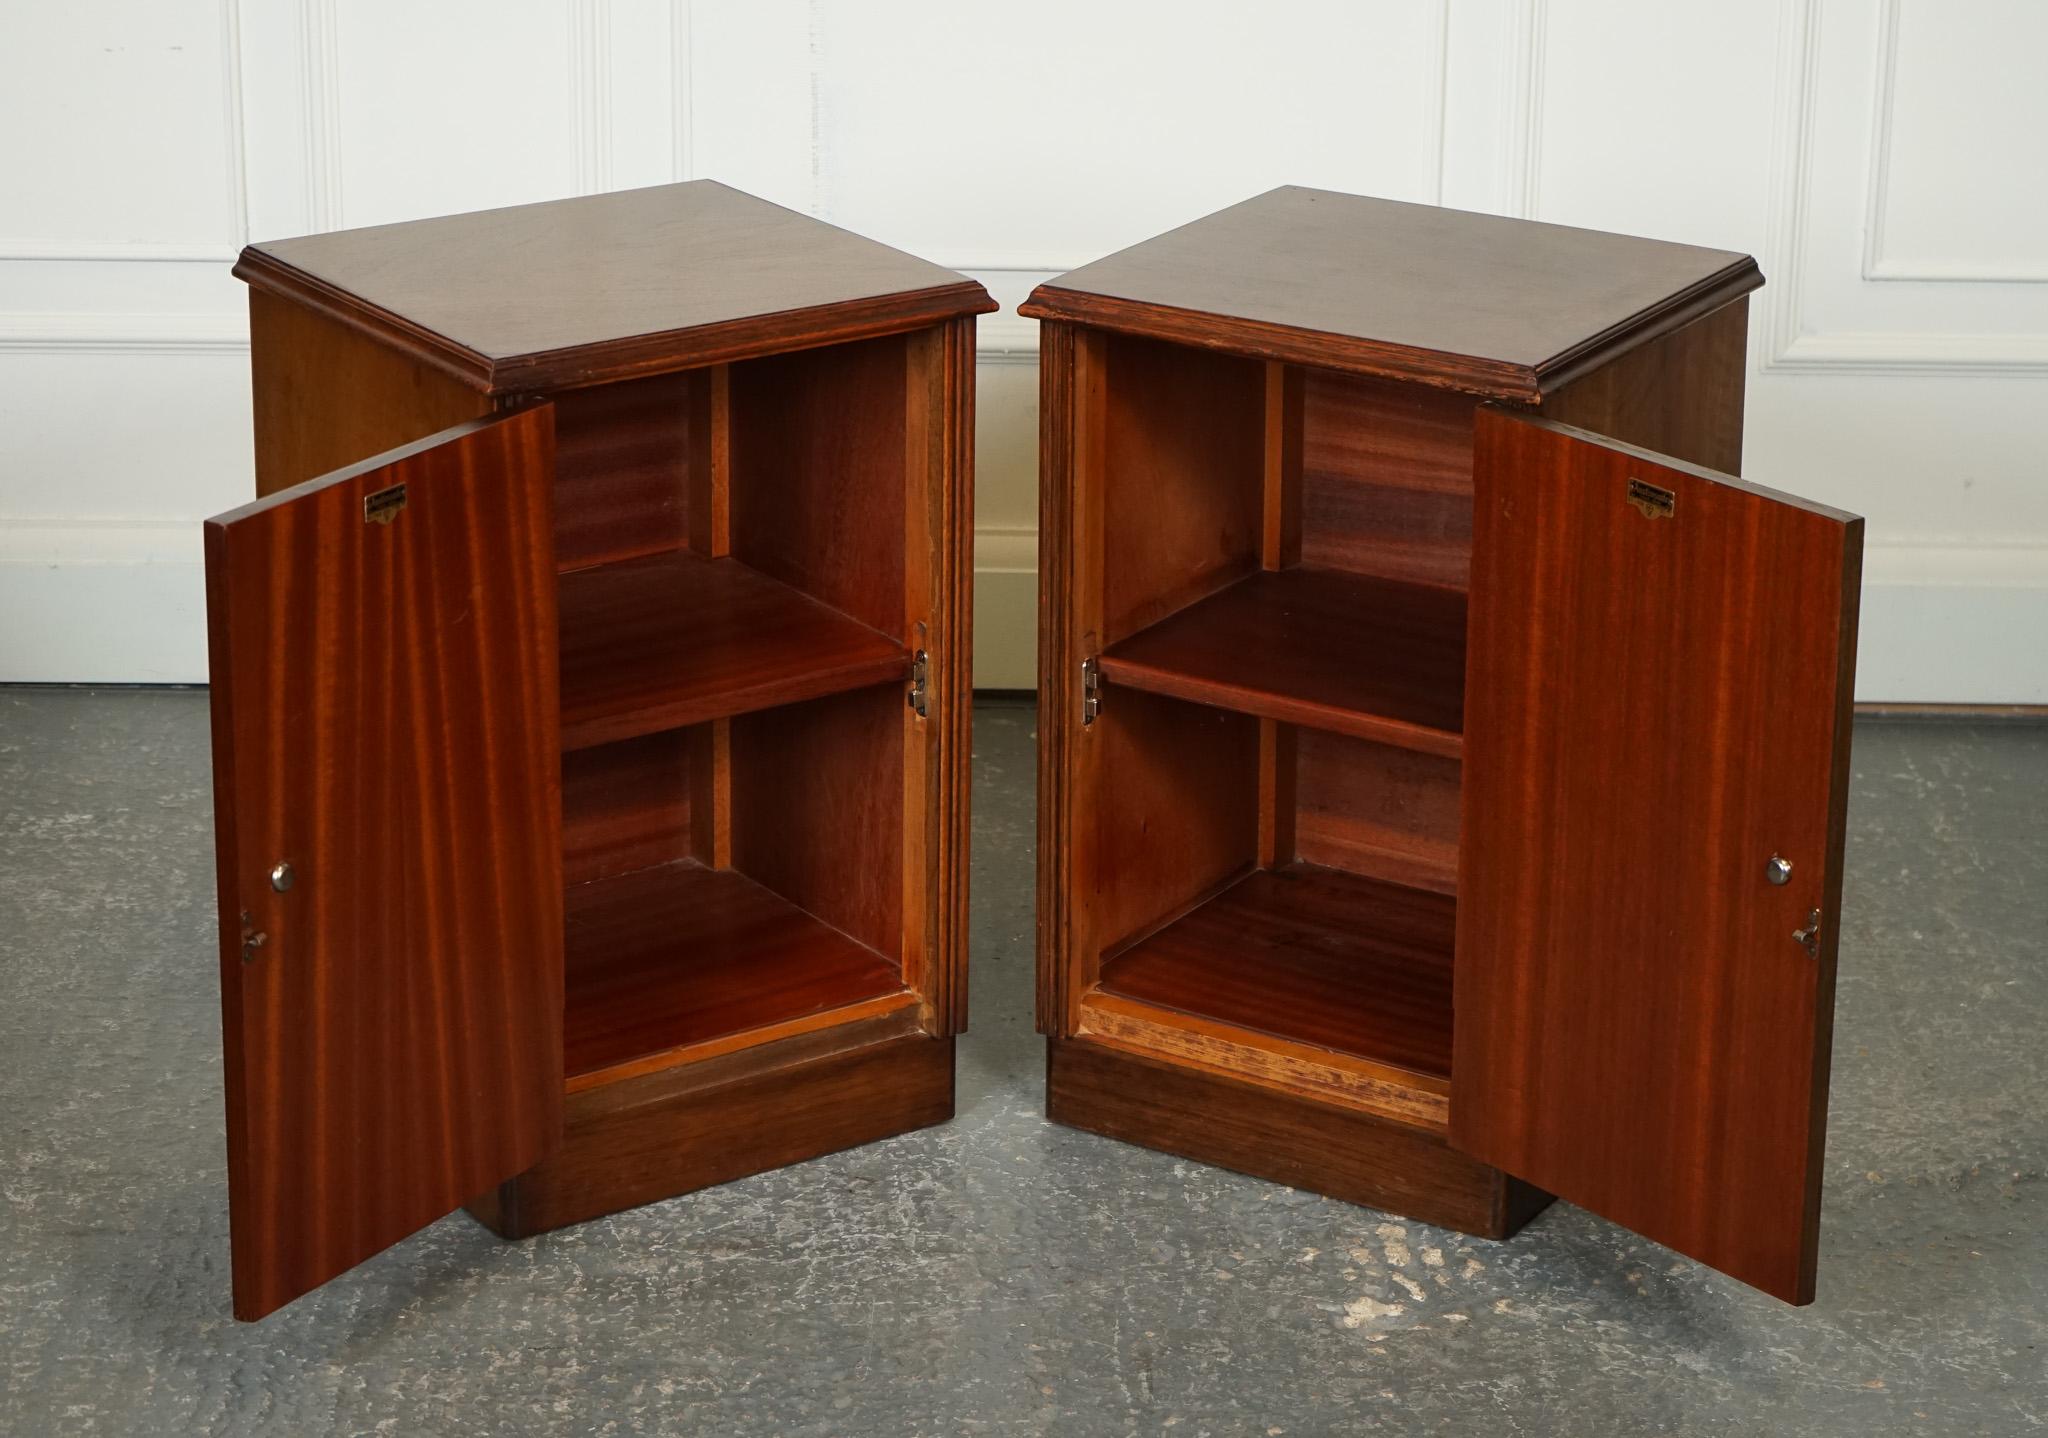 
Antiques of London



We are delighted to offer for sale this Pair of 1960s Art Deco Style Bedside Nightstands Side End Lamp Tables.

A pair of 1960s Art Deco bedside nightstands side end lamp tables is a chic and retro furniture set that